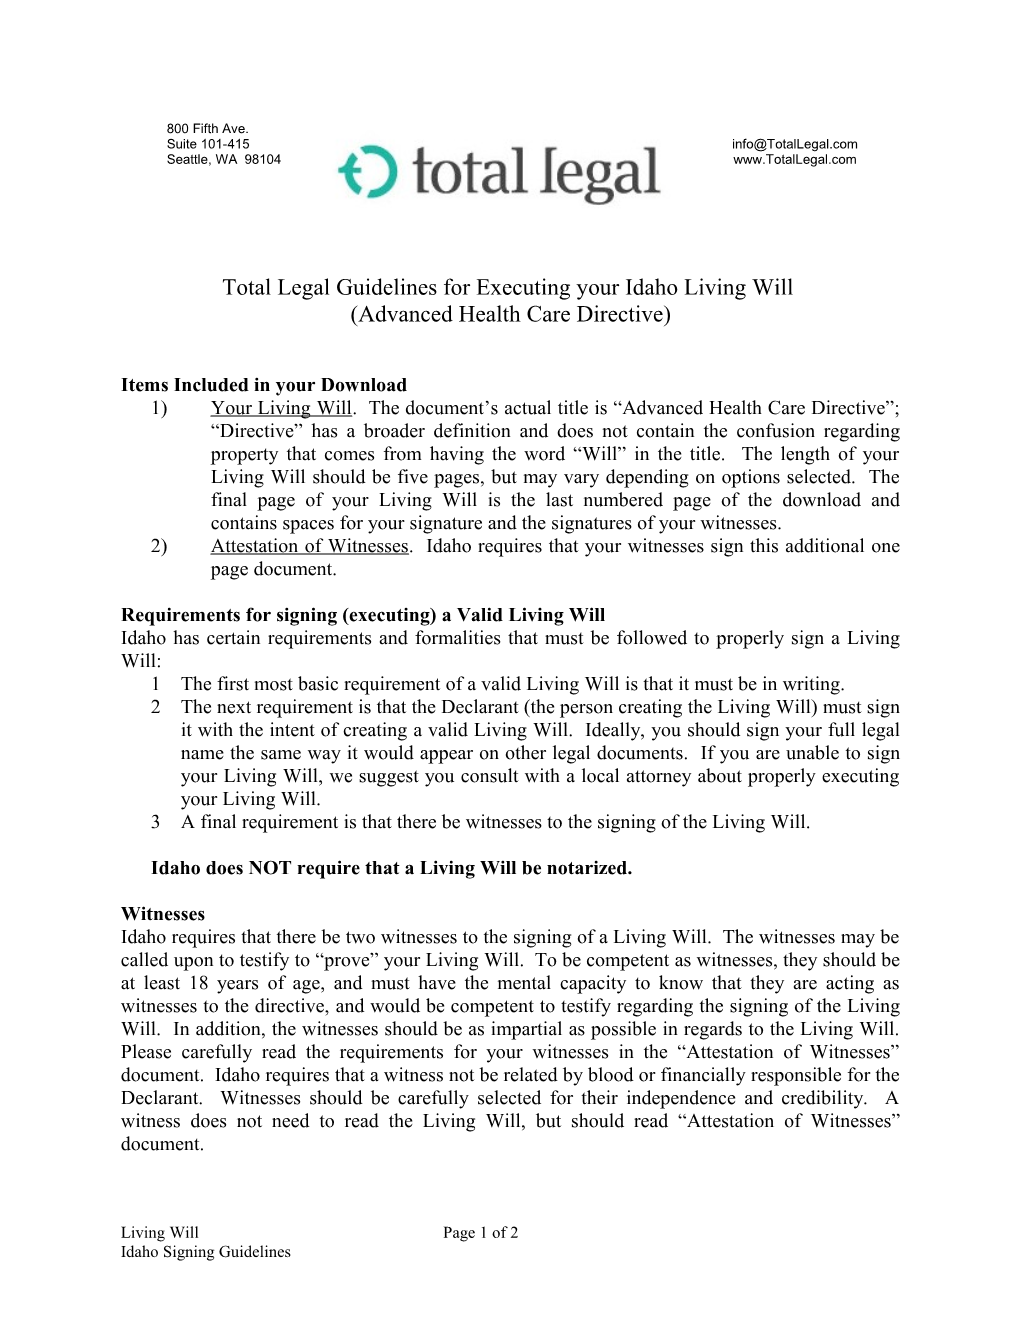 Total Legal Guidelines for Executing Your Idaho Living Will